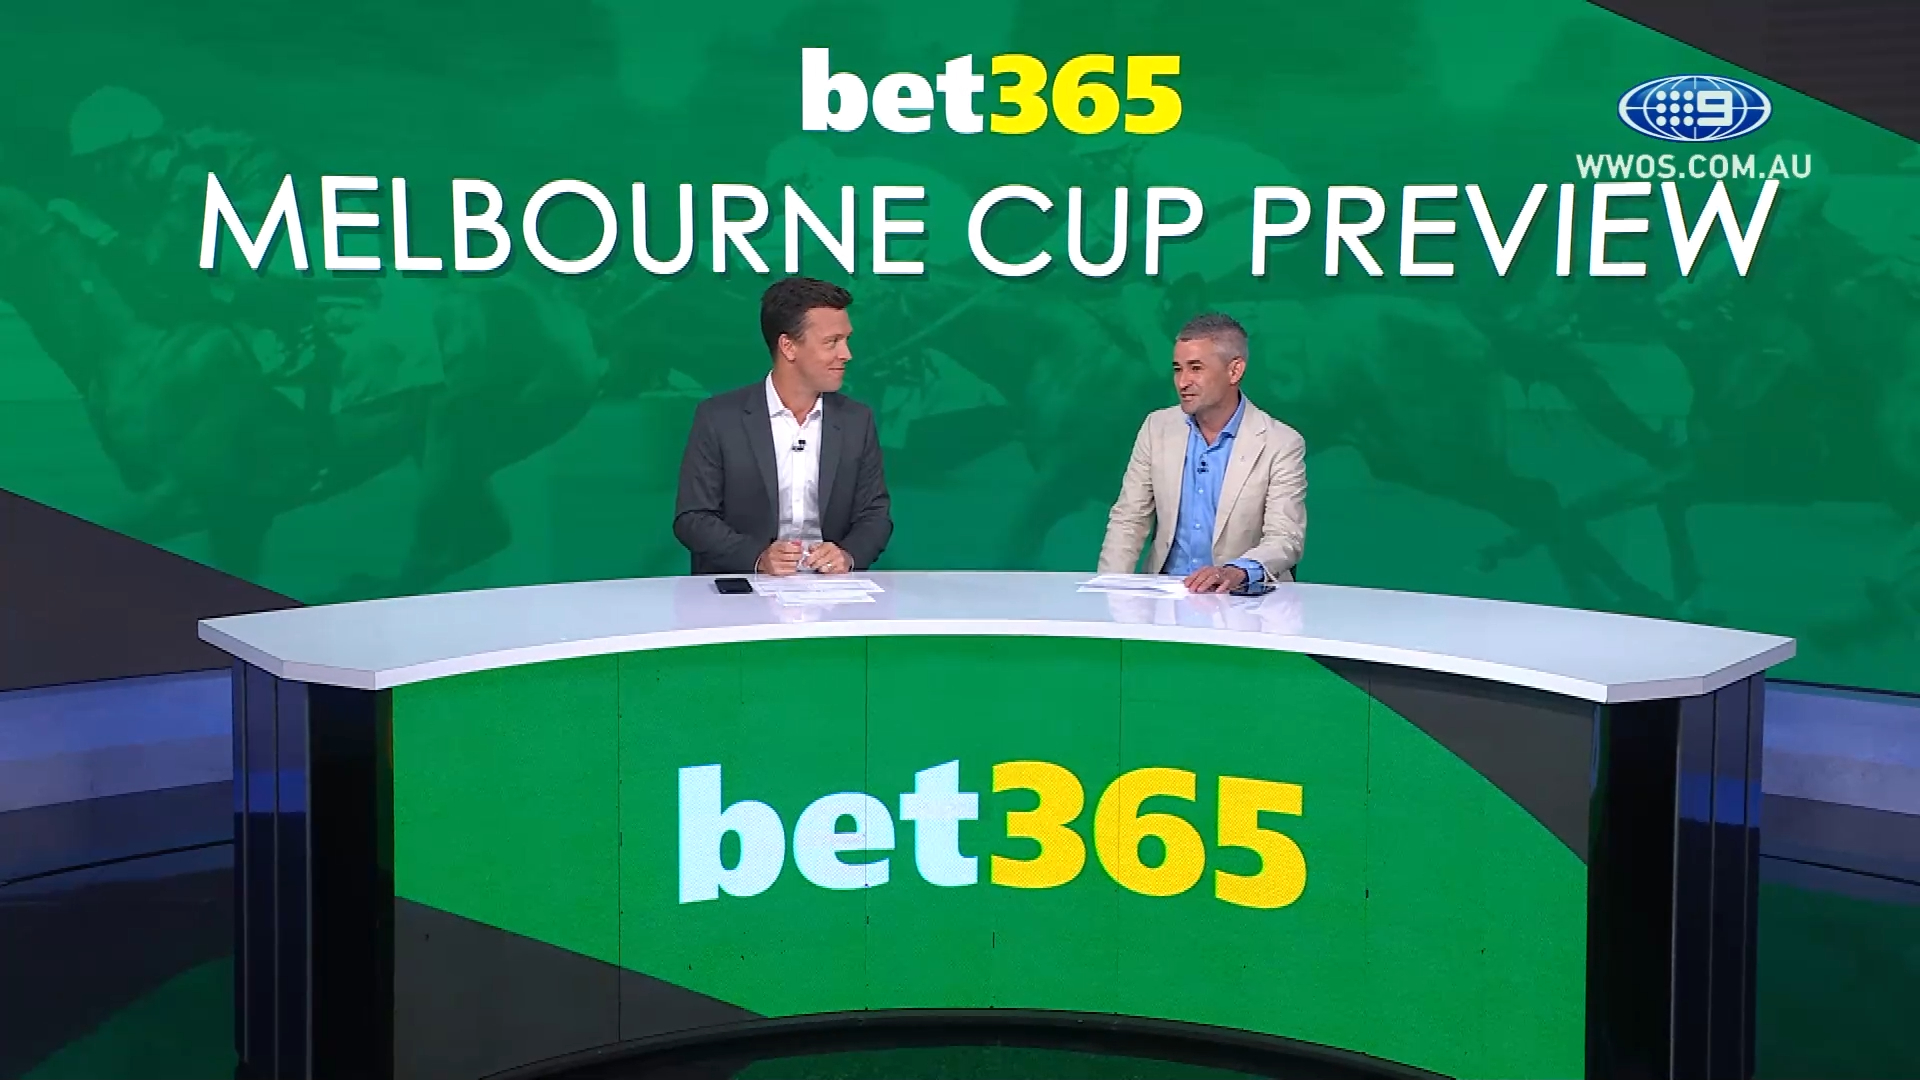 Melbourne Cup: 2021 Preview and Top tips